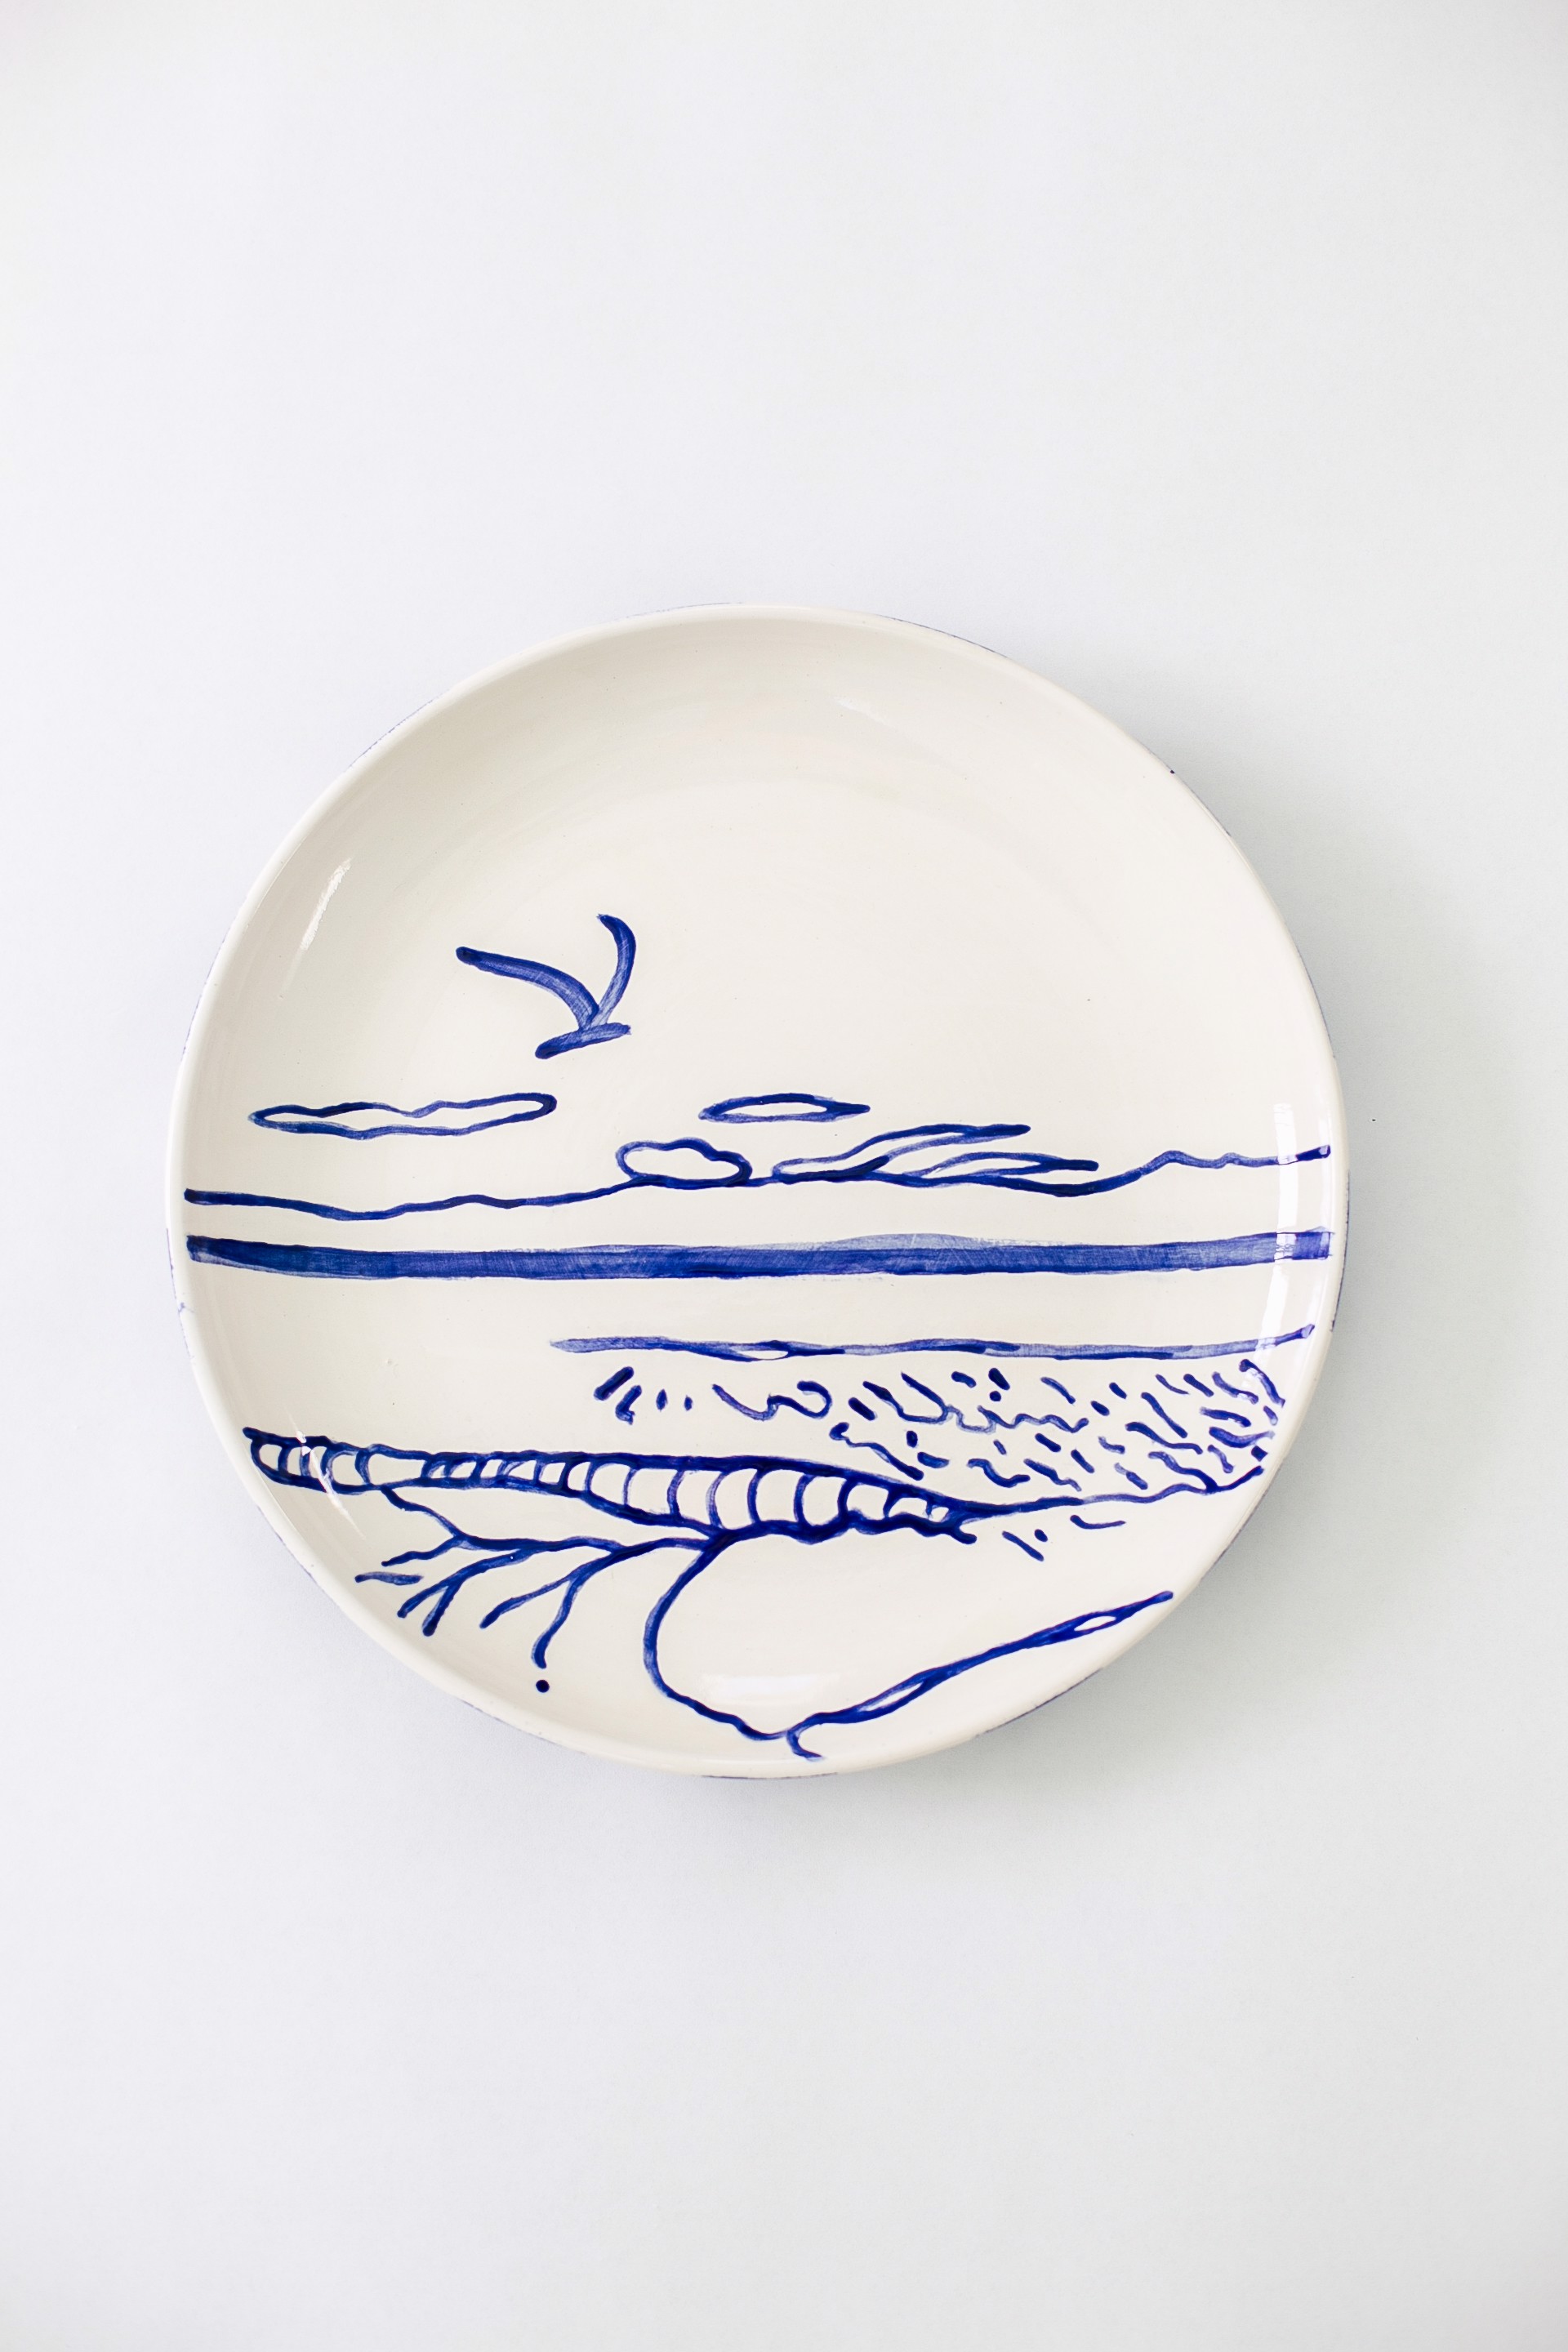 Dinner Plate 6 by Andrea Naylor